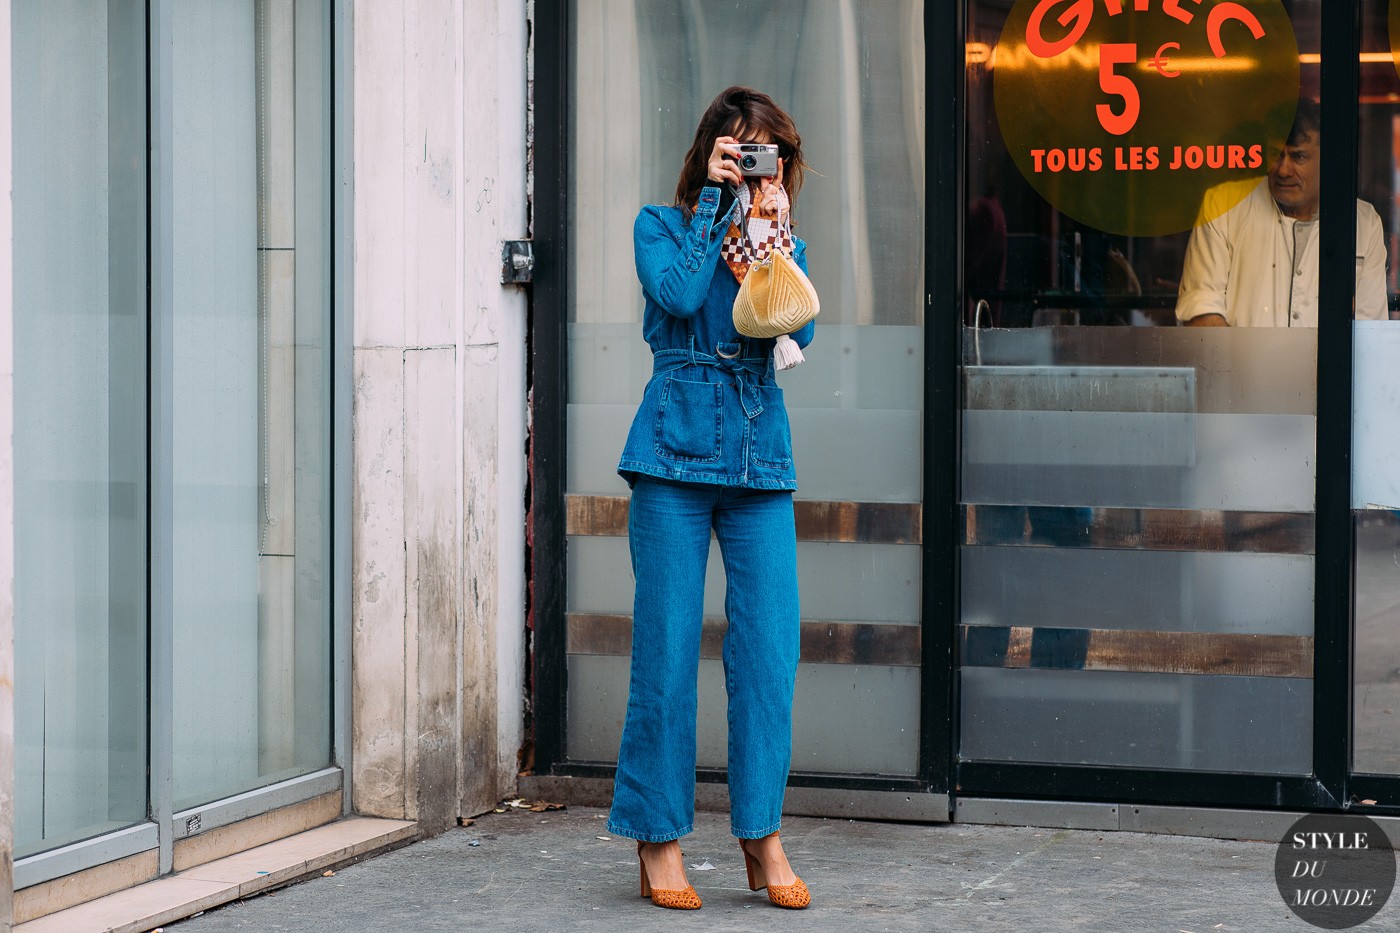 Jeanne Damas by STYLEDUMONDE Street Style Fashion Photography FW18 20180303 48A9956